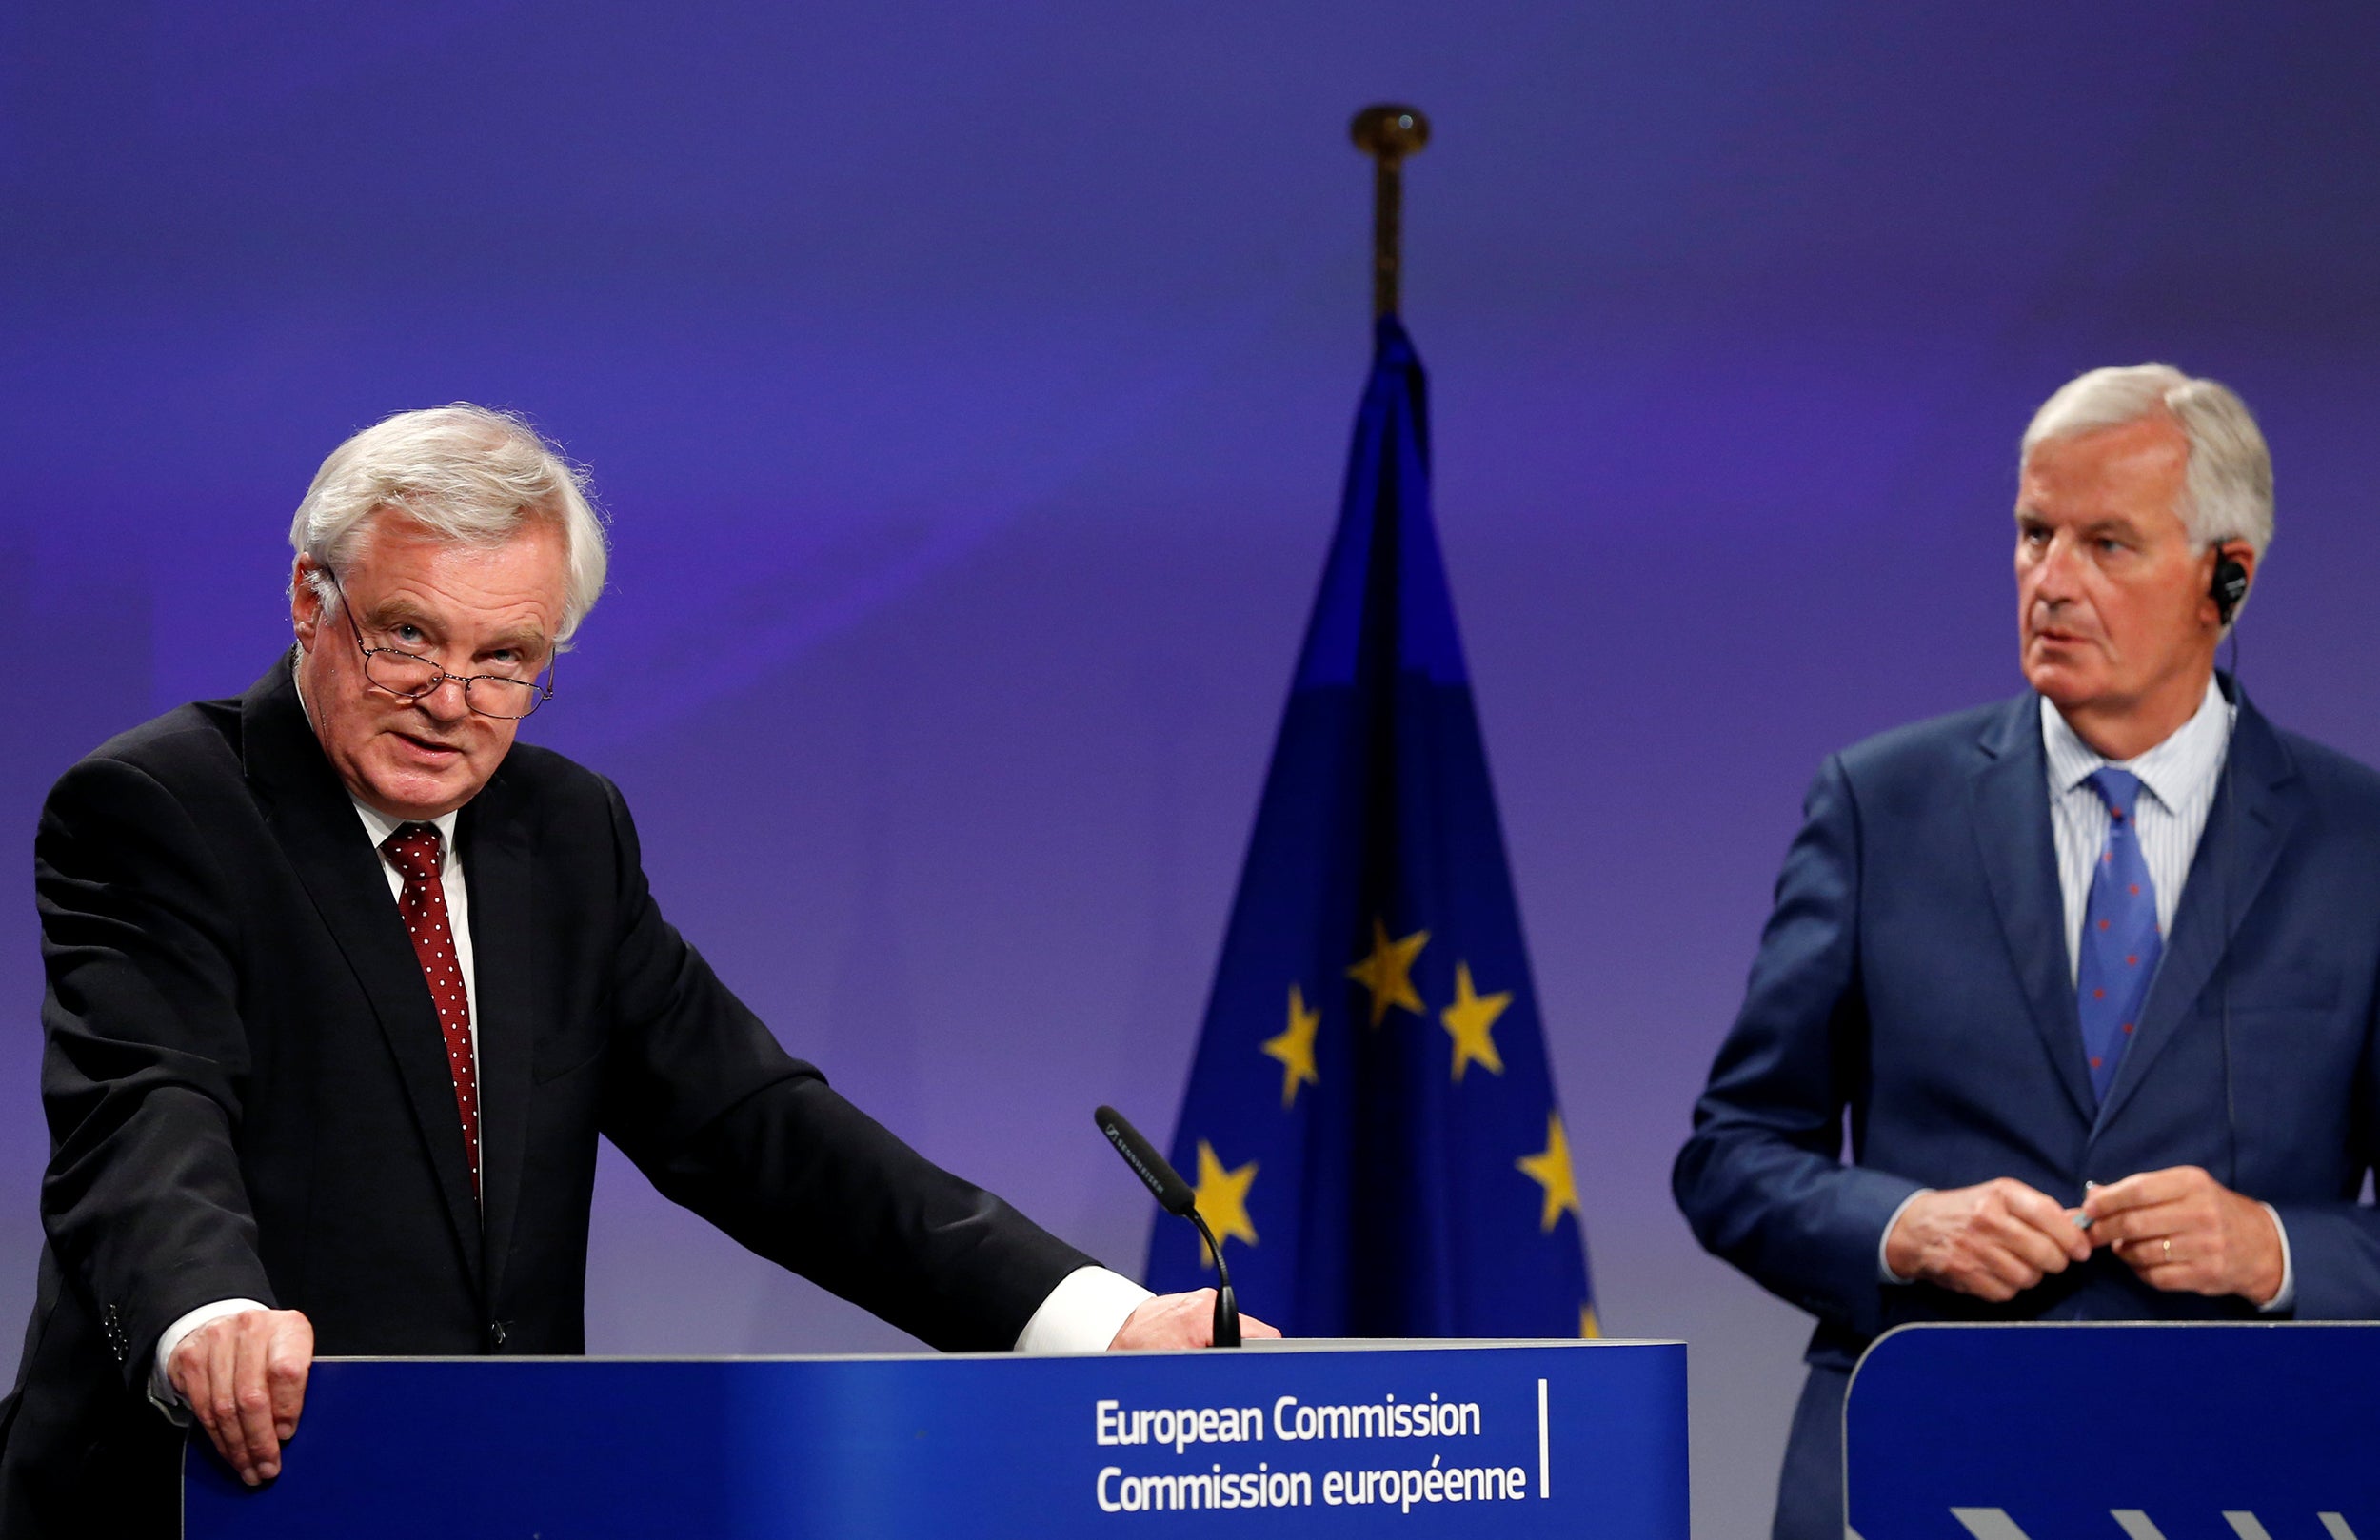 Michel Barnier has been very clear that the EU does not have to agree to any kind of deal